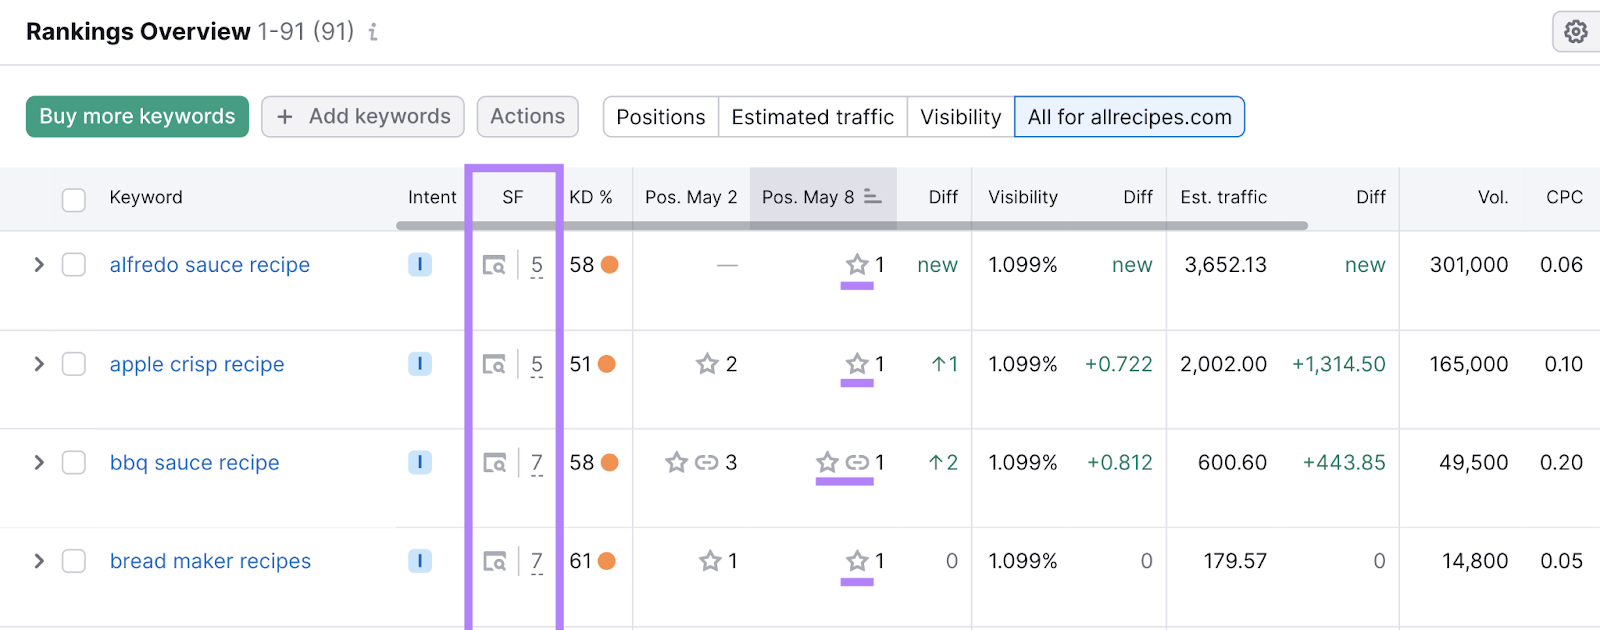 position tracking's serp features column and icons for captured serp features per keyword